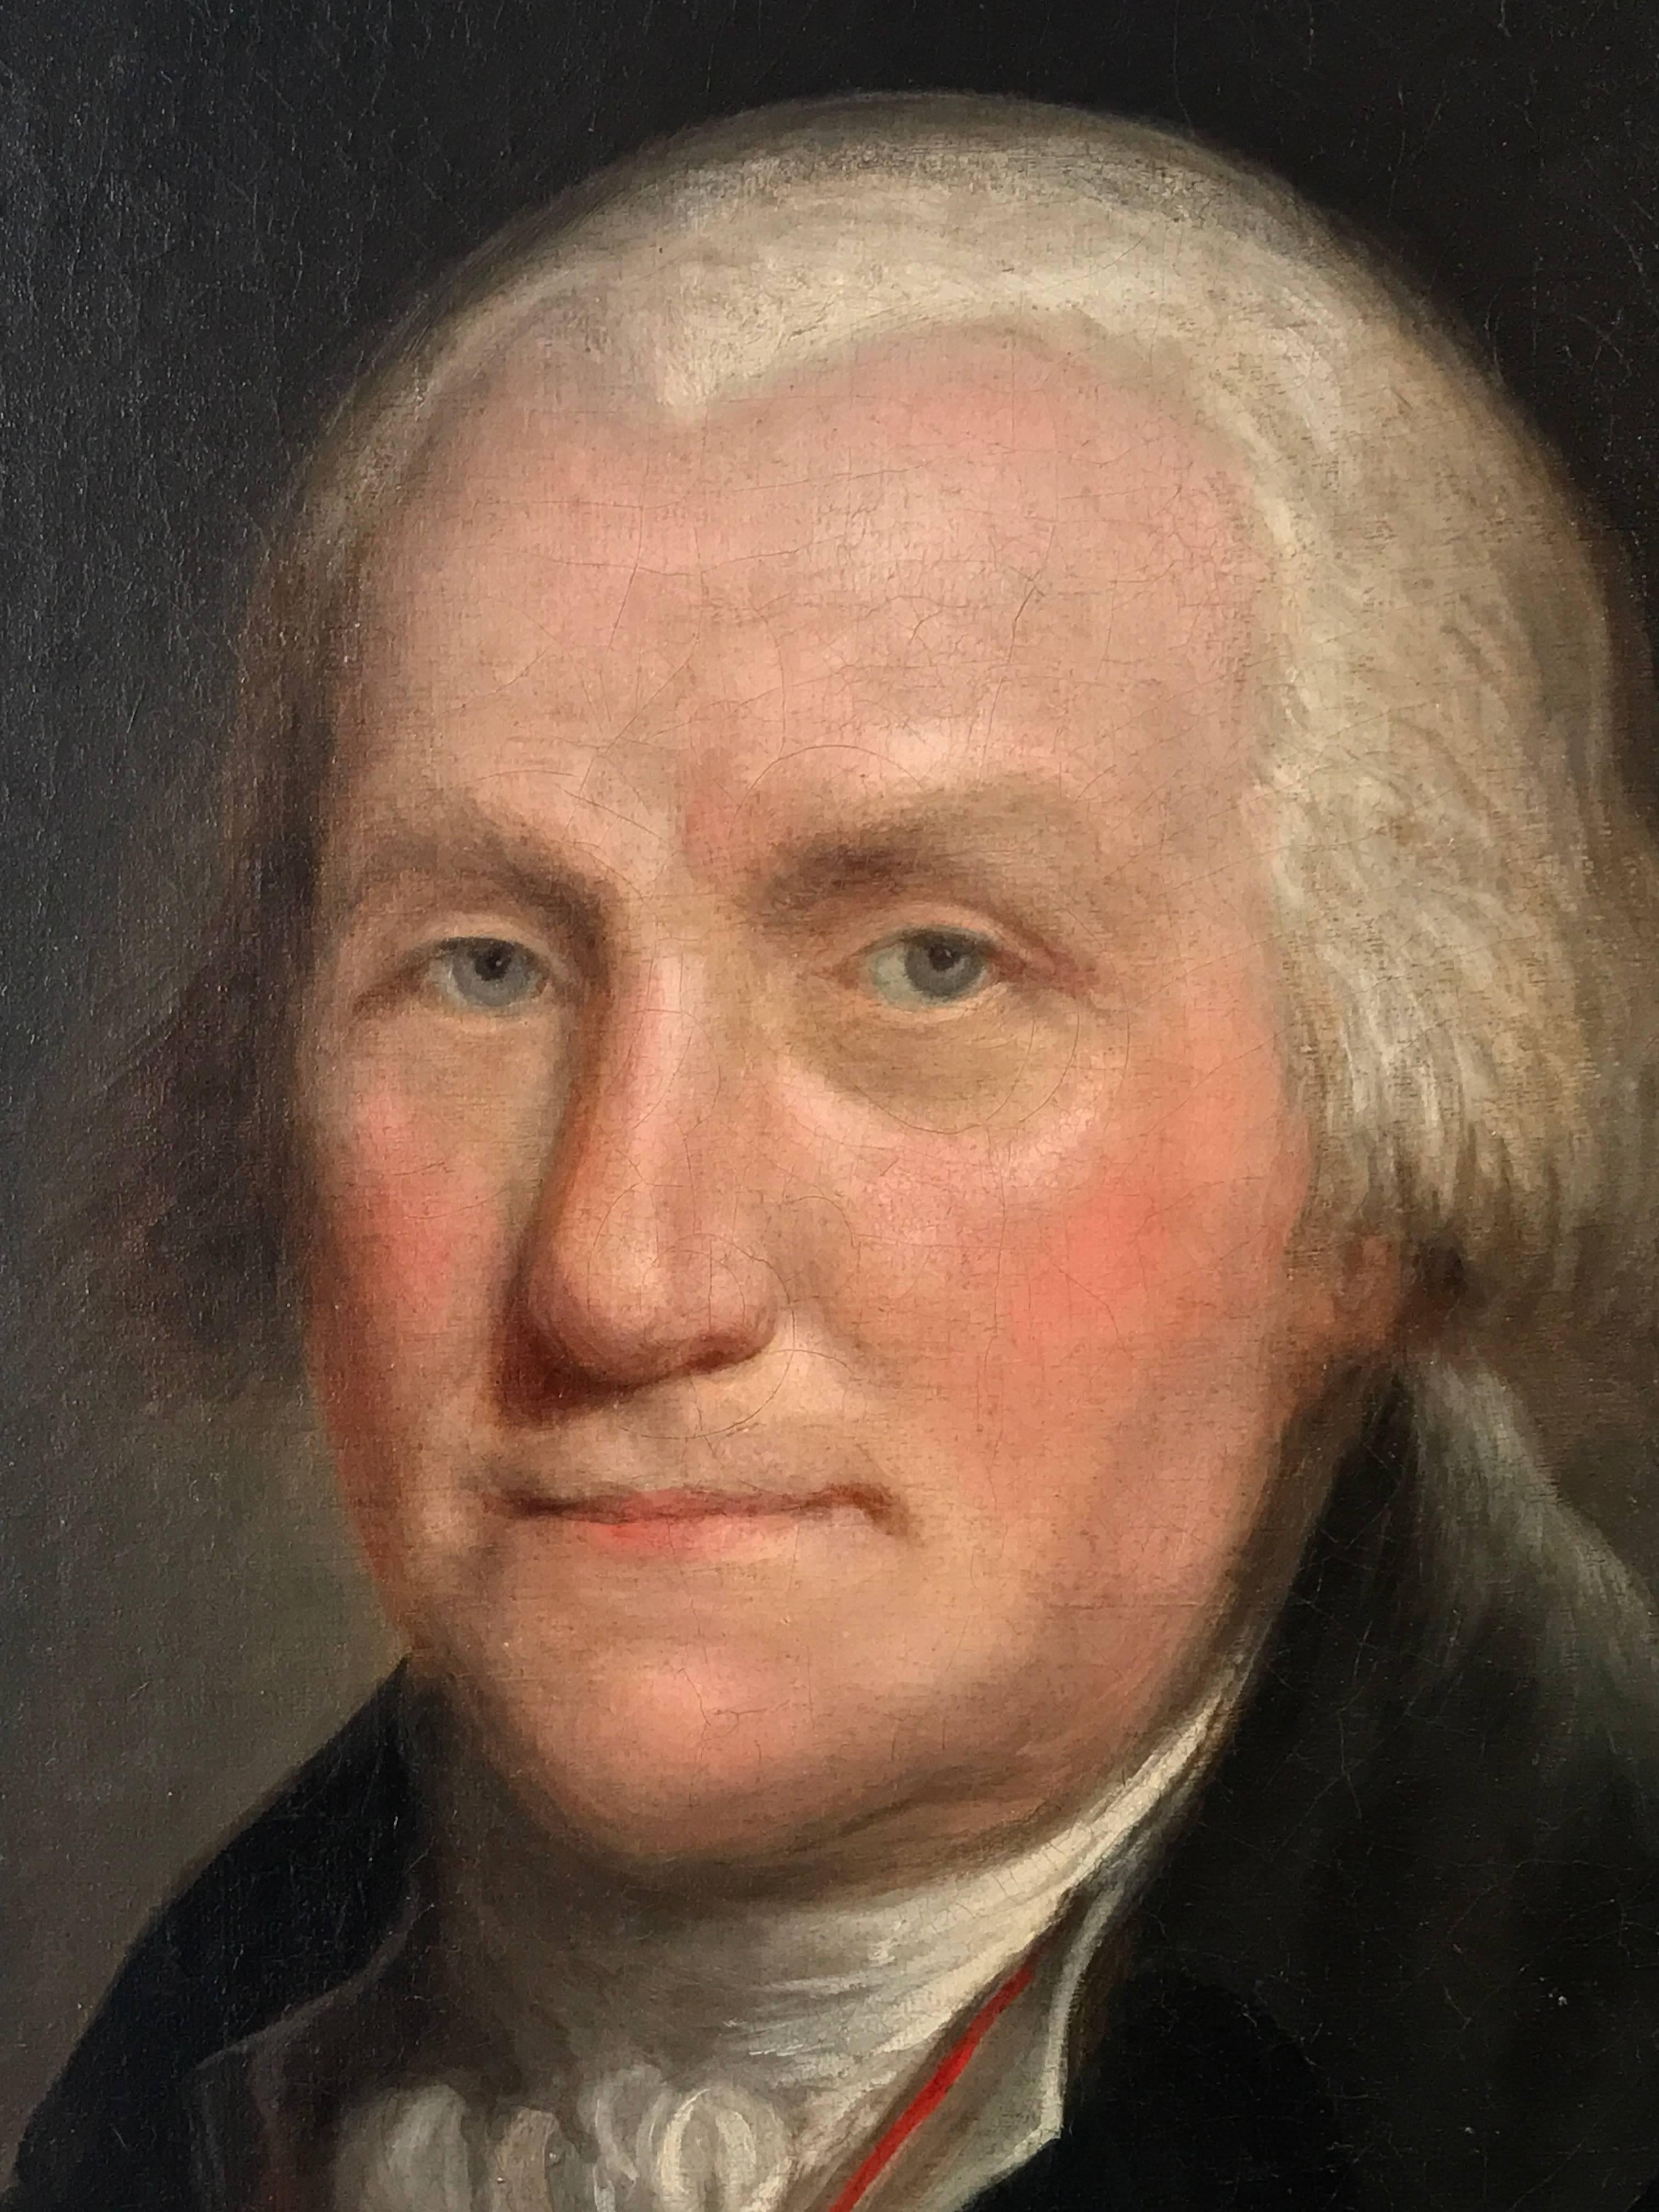 what color were george washington's eyes